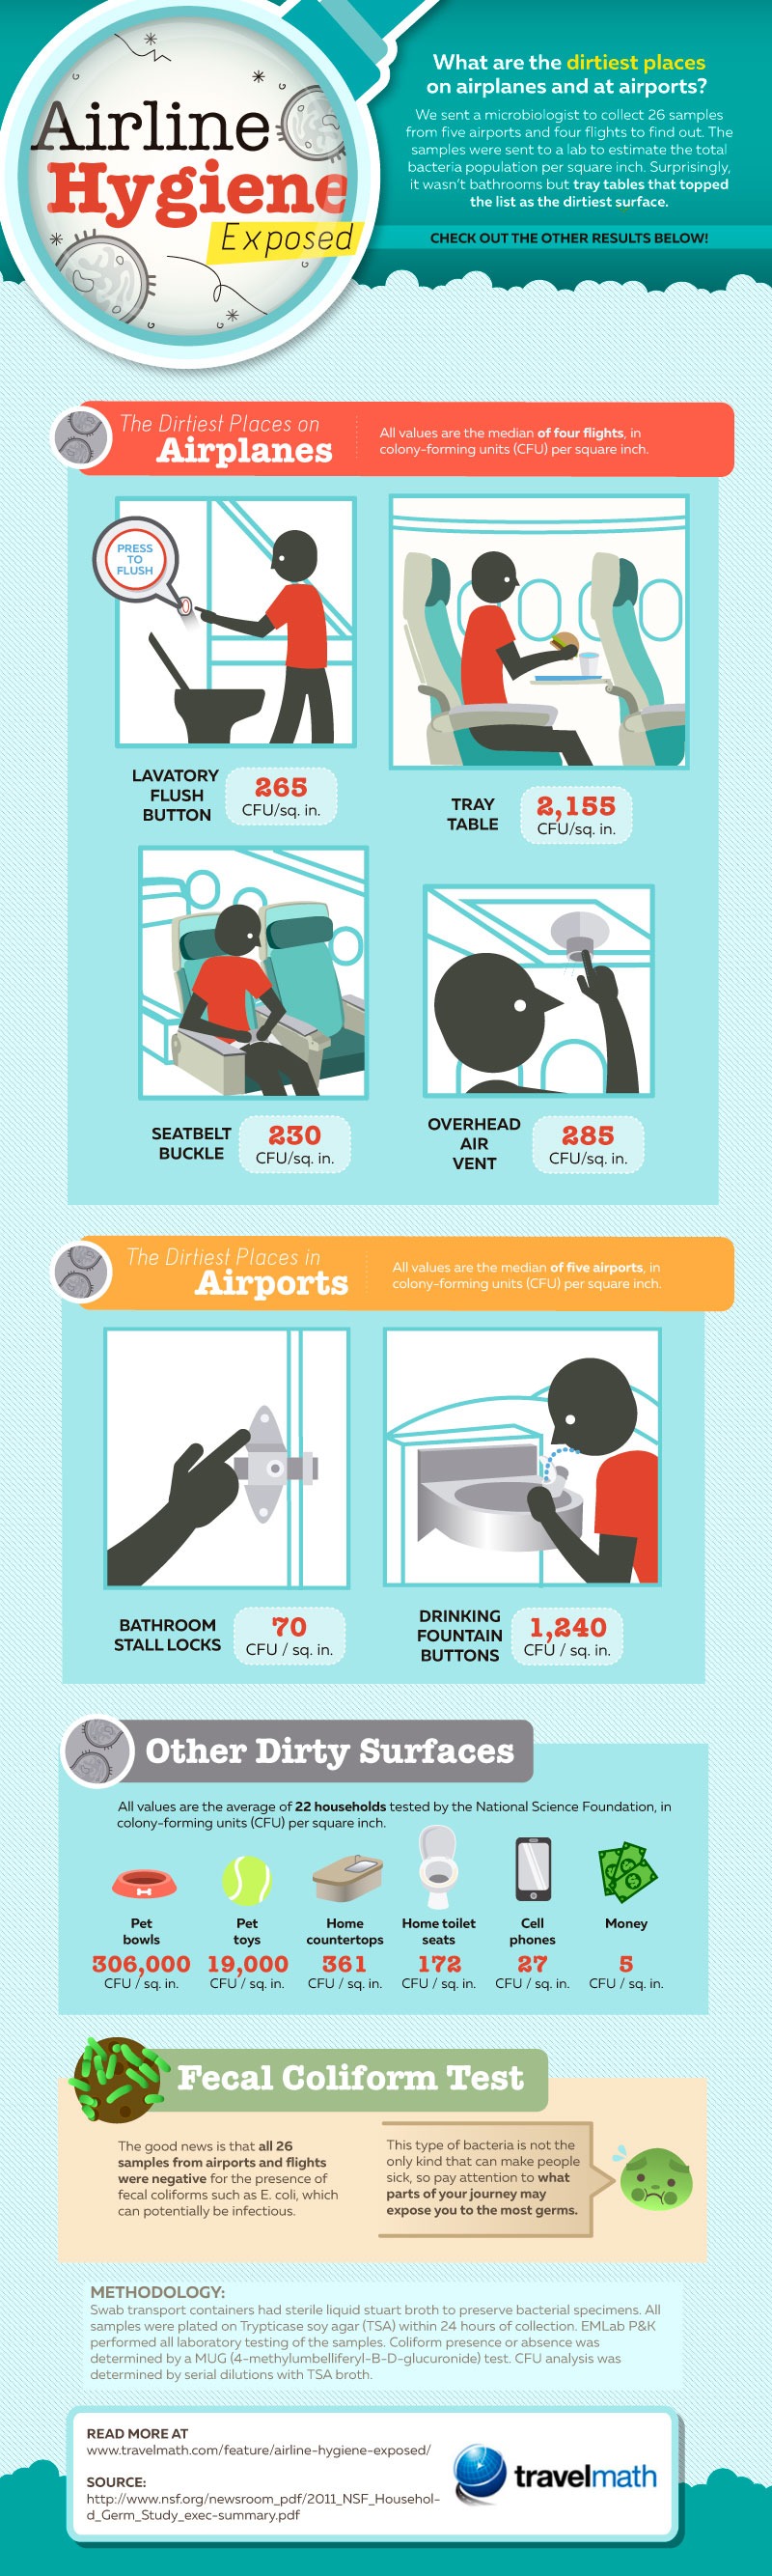 Airports and aircraft are infested with germs.